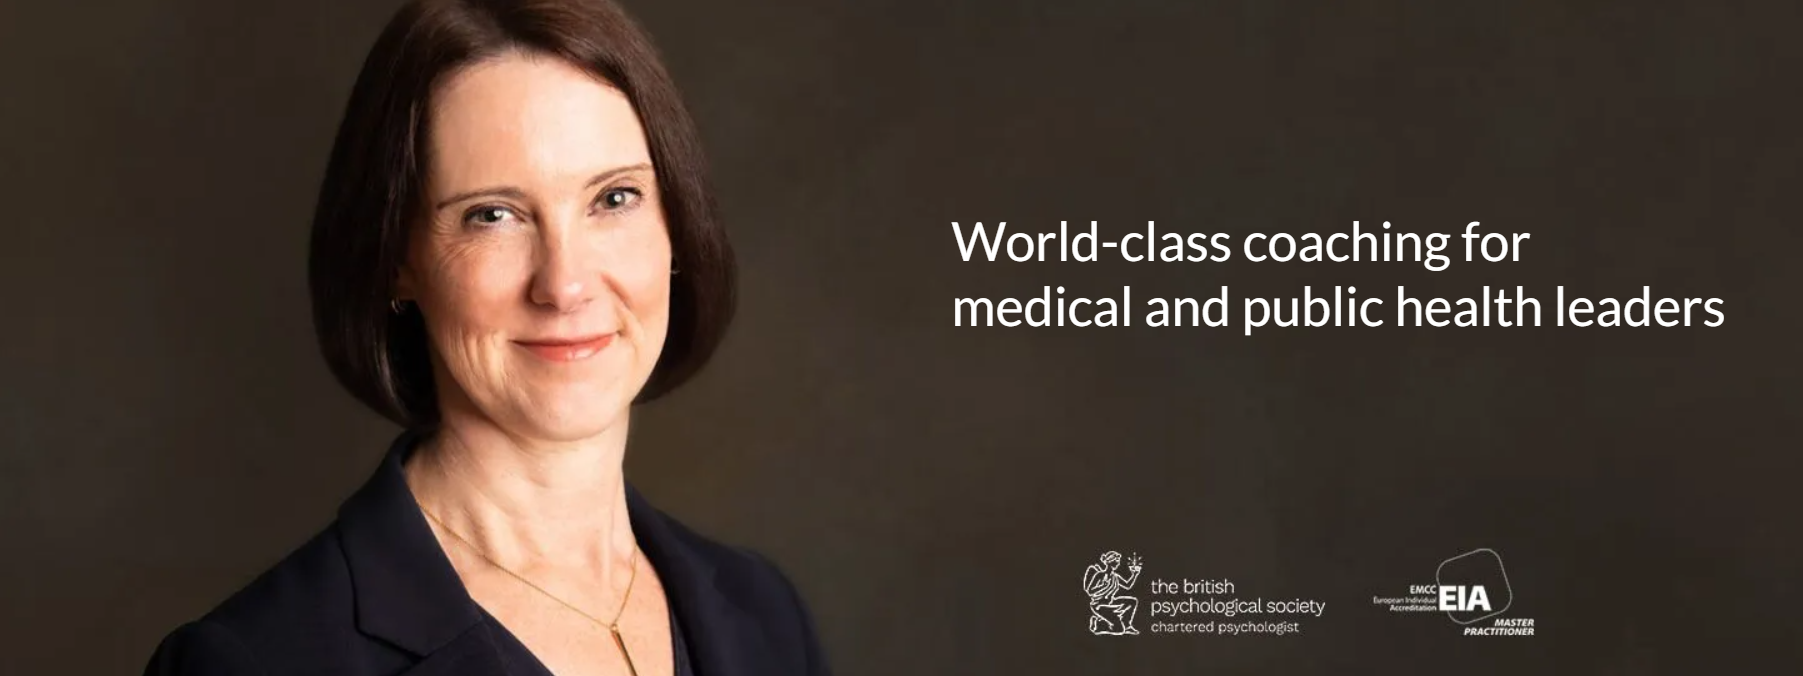 Dr Fiona Day provides world-class coaching and mentoring for medical and public health leaders across the UK and internationally